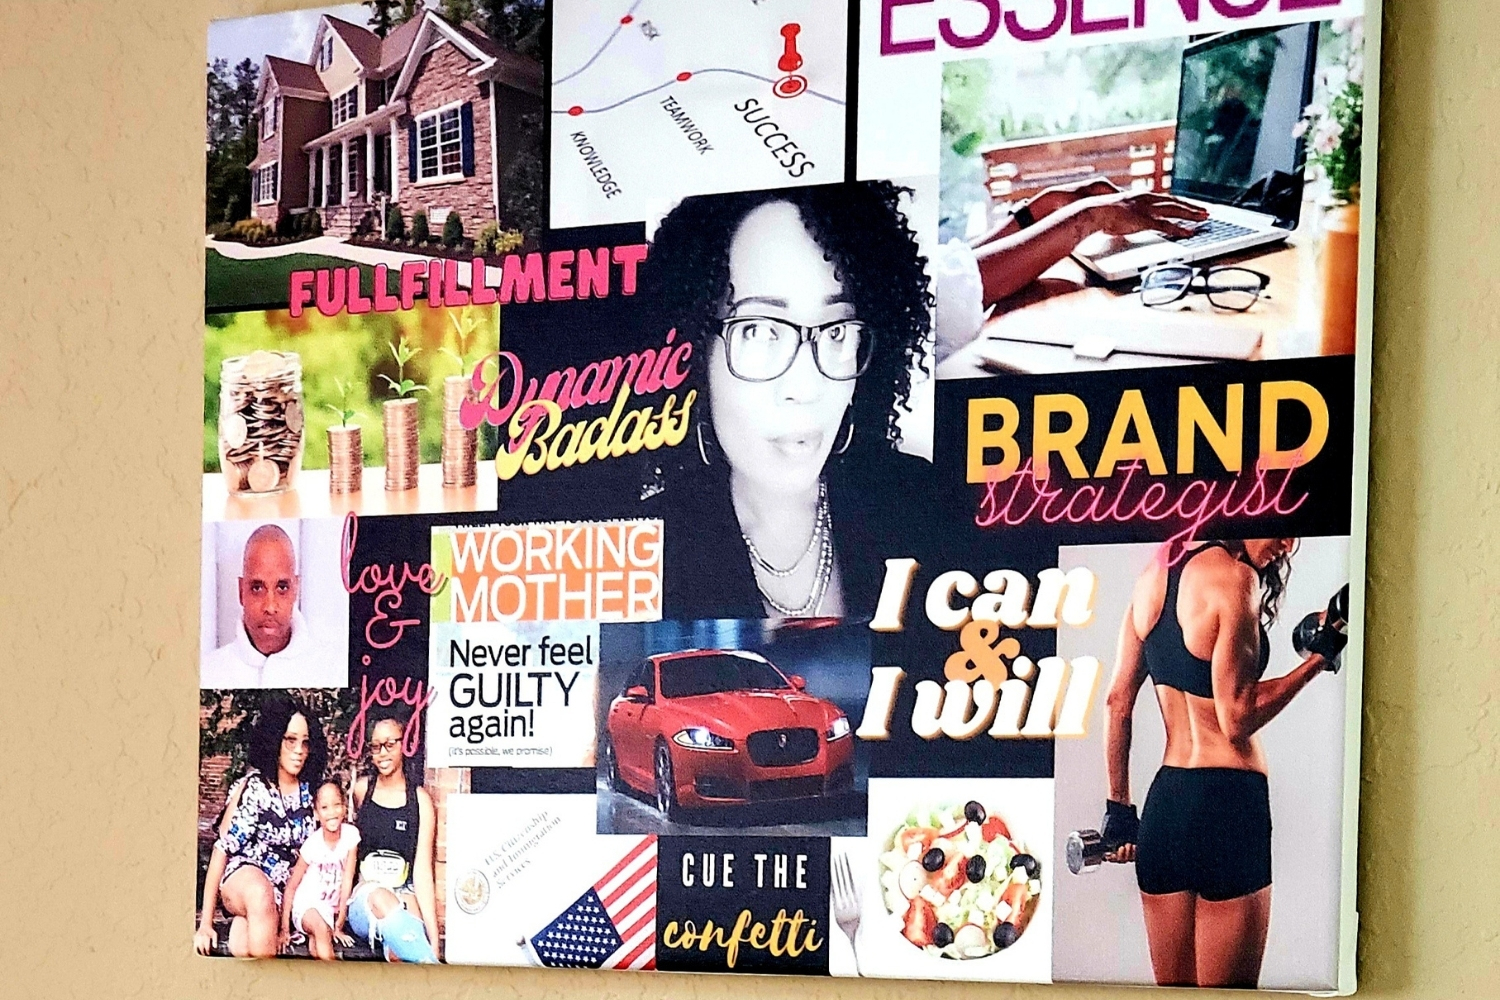 How To Make A Vision Board That Works - xoNecole